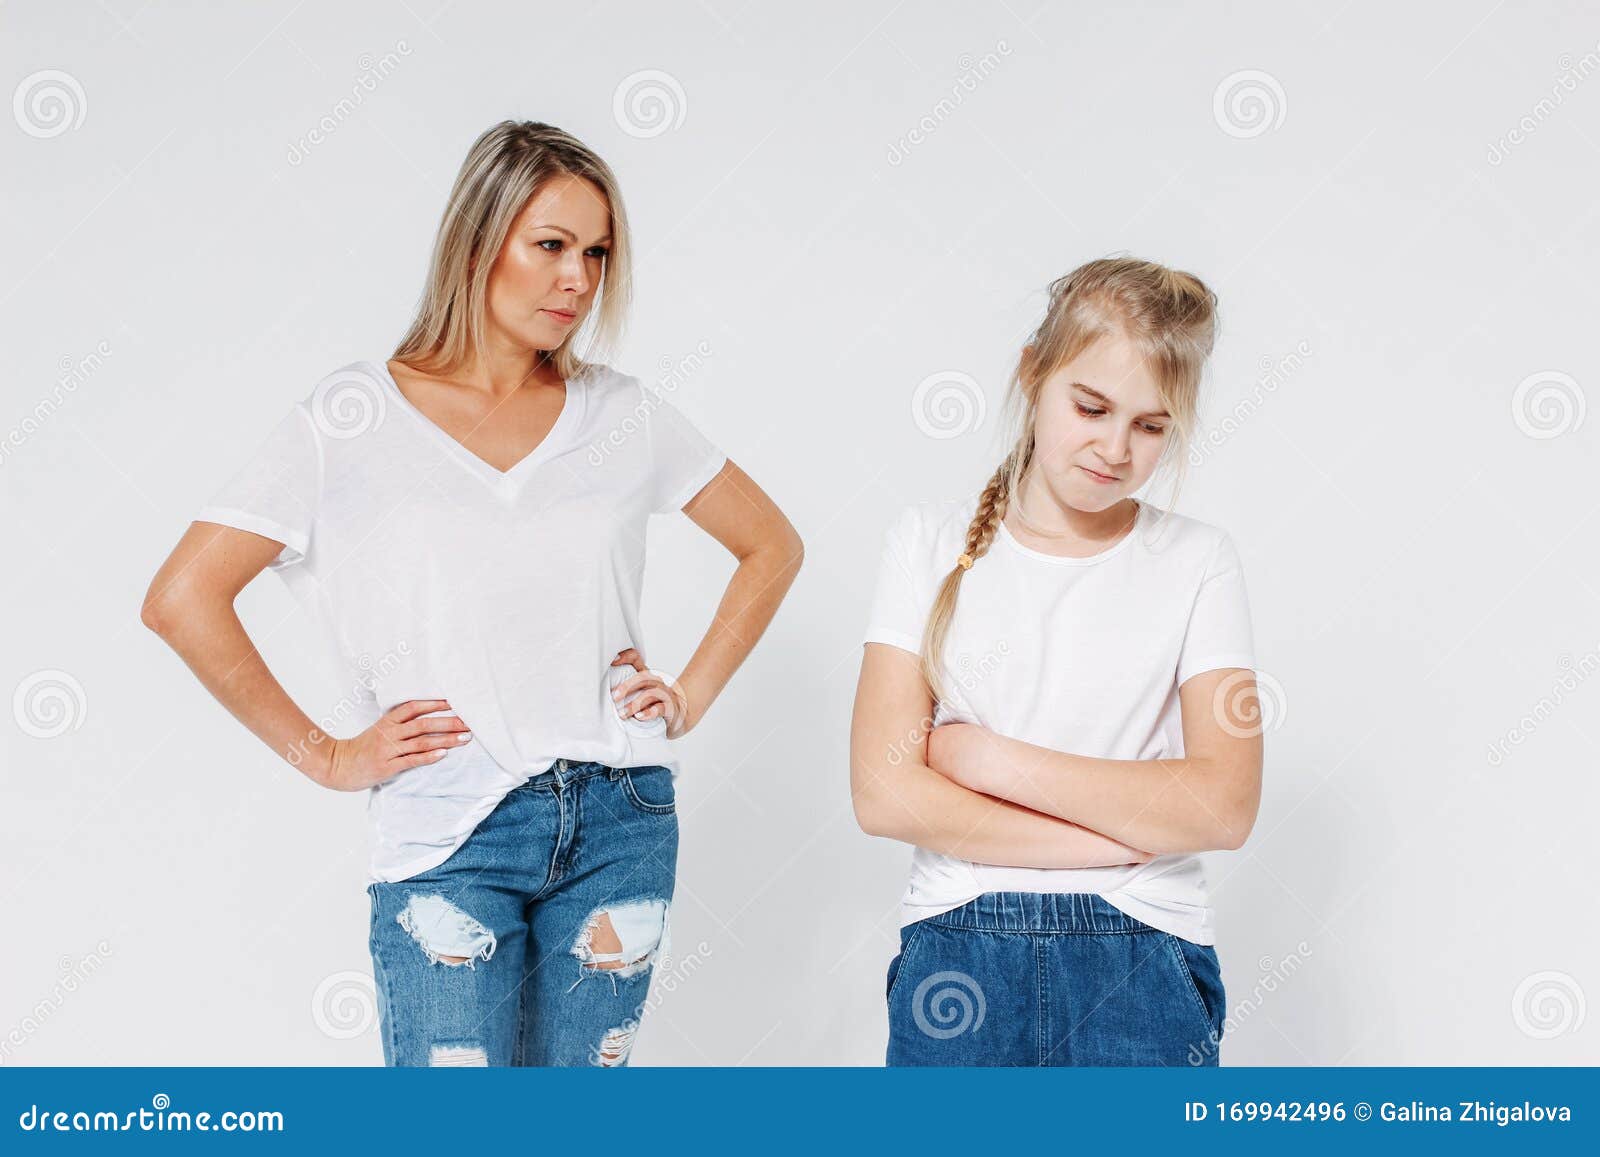 365 Daughter Jeans Shirts Stock Photos Free & Royalty-Free Stock Photos Dreamstime